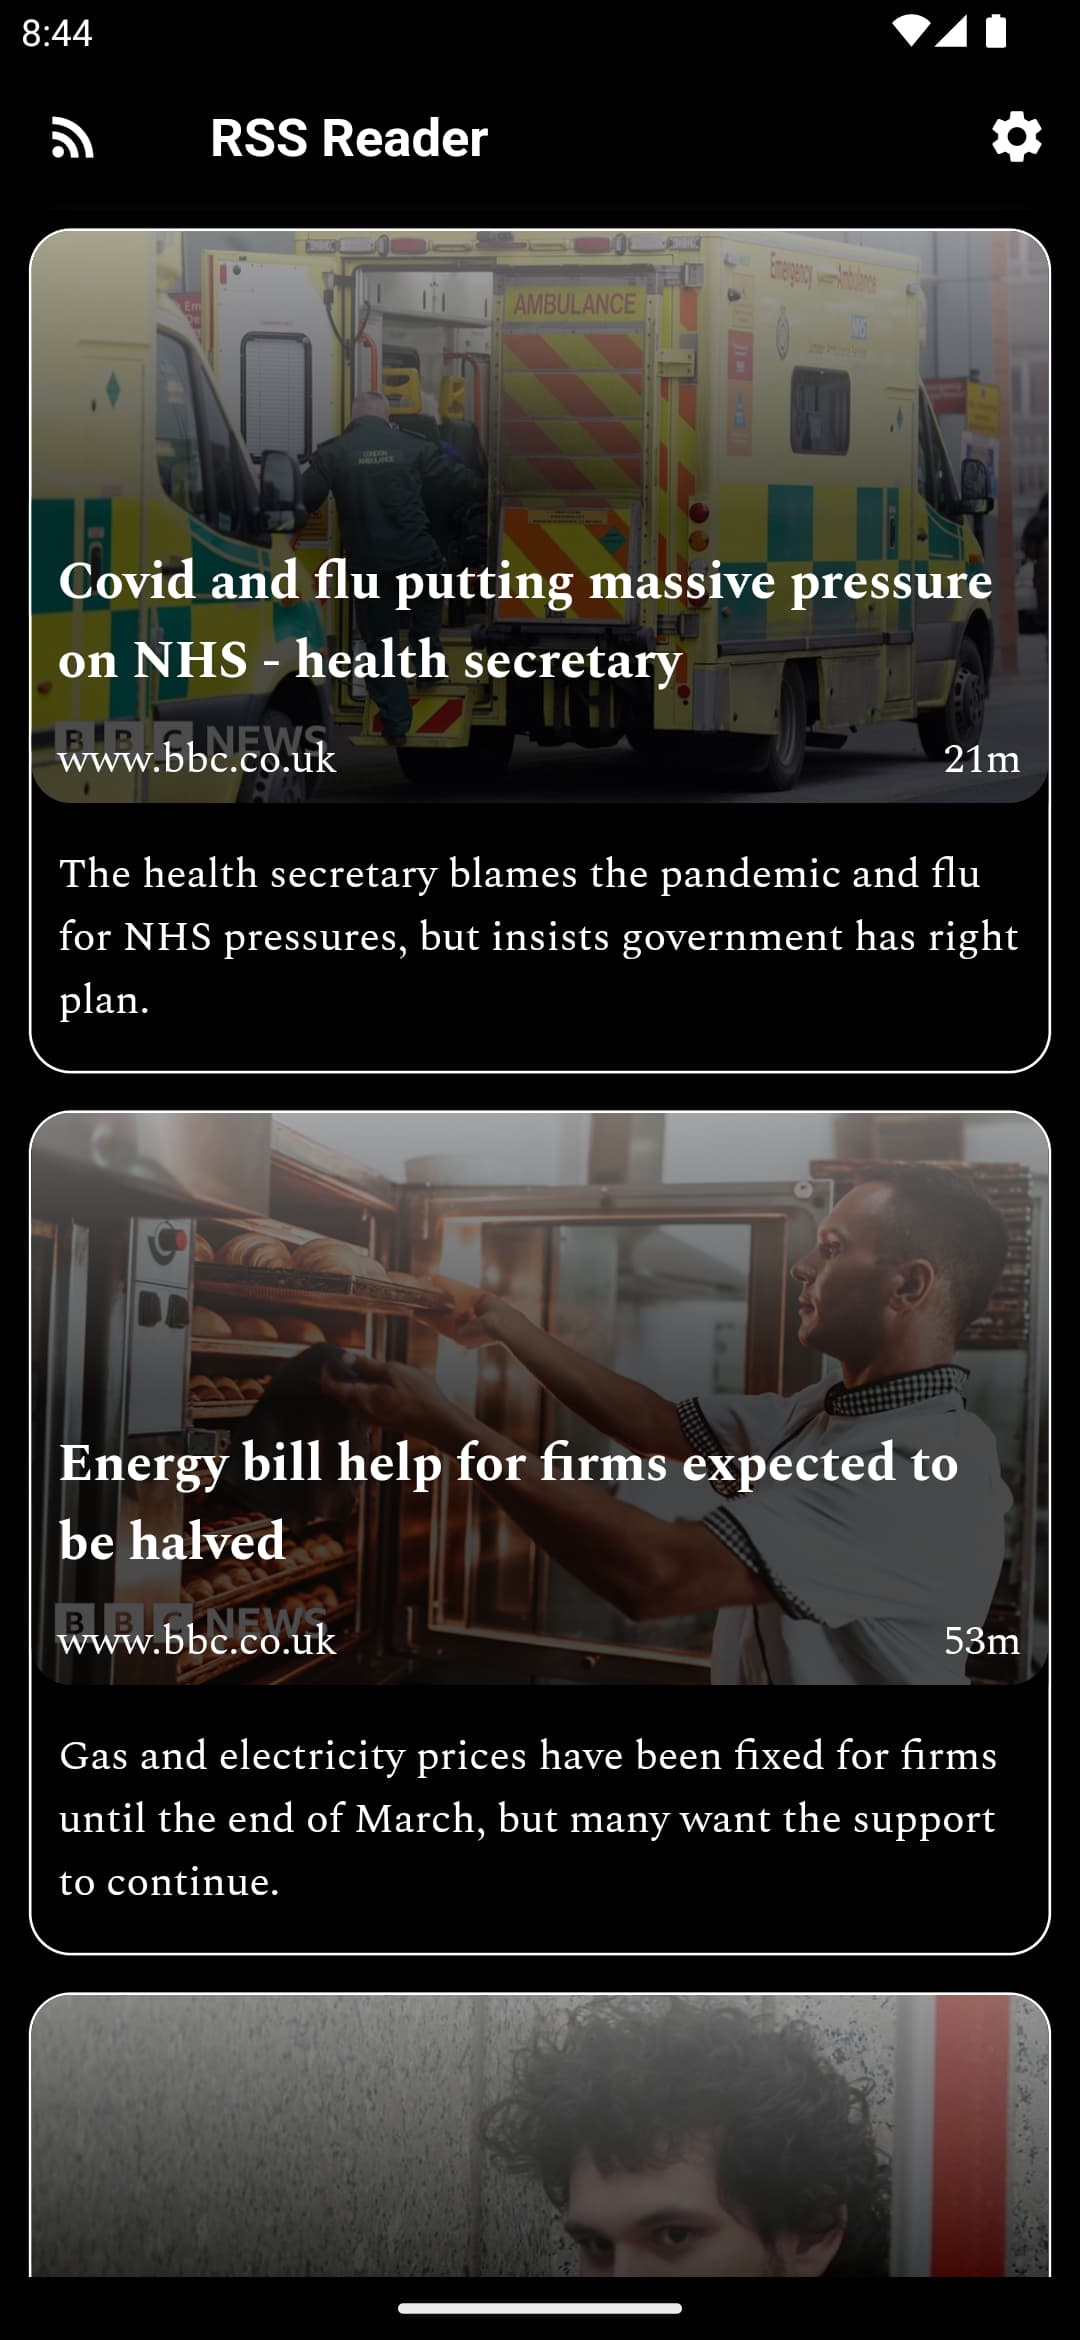 a screenshot of the app interface, showing apopulated news feed